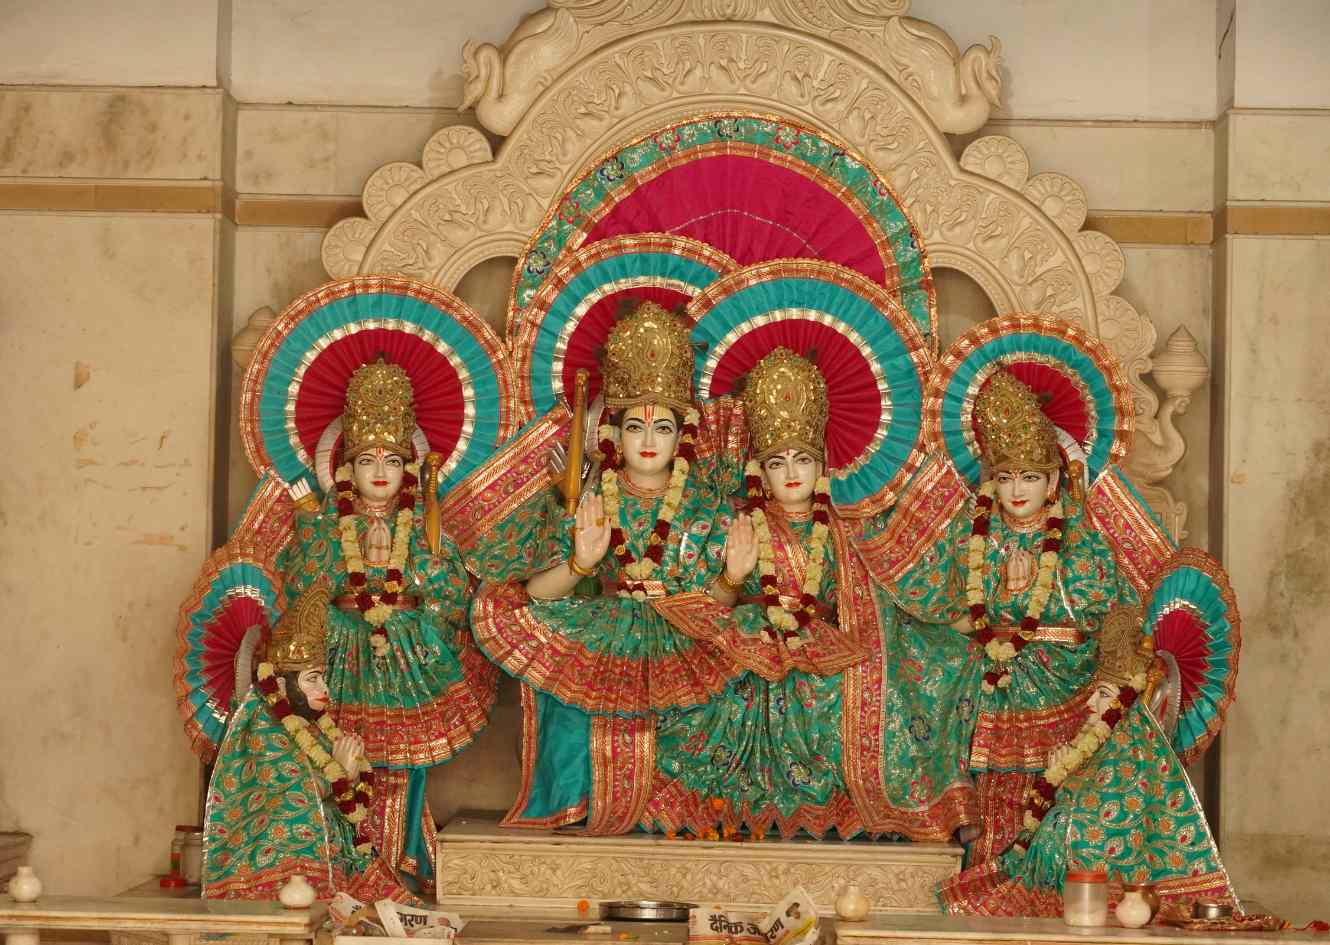 Rama Navami is a significant Hindu festival that reveres the birth of Lord Rama, one of the most revered deities in Hinduism and the central figure in the epic Ramayana.